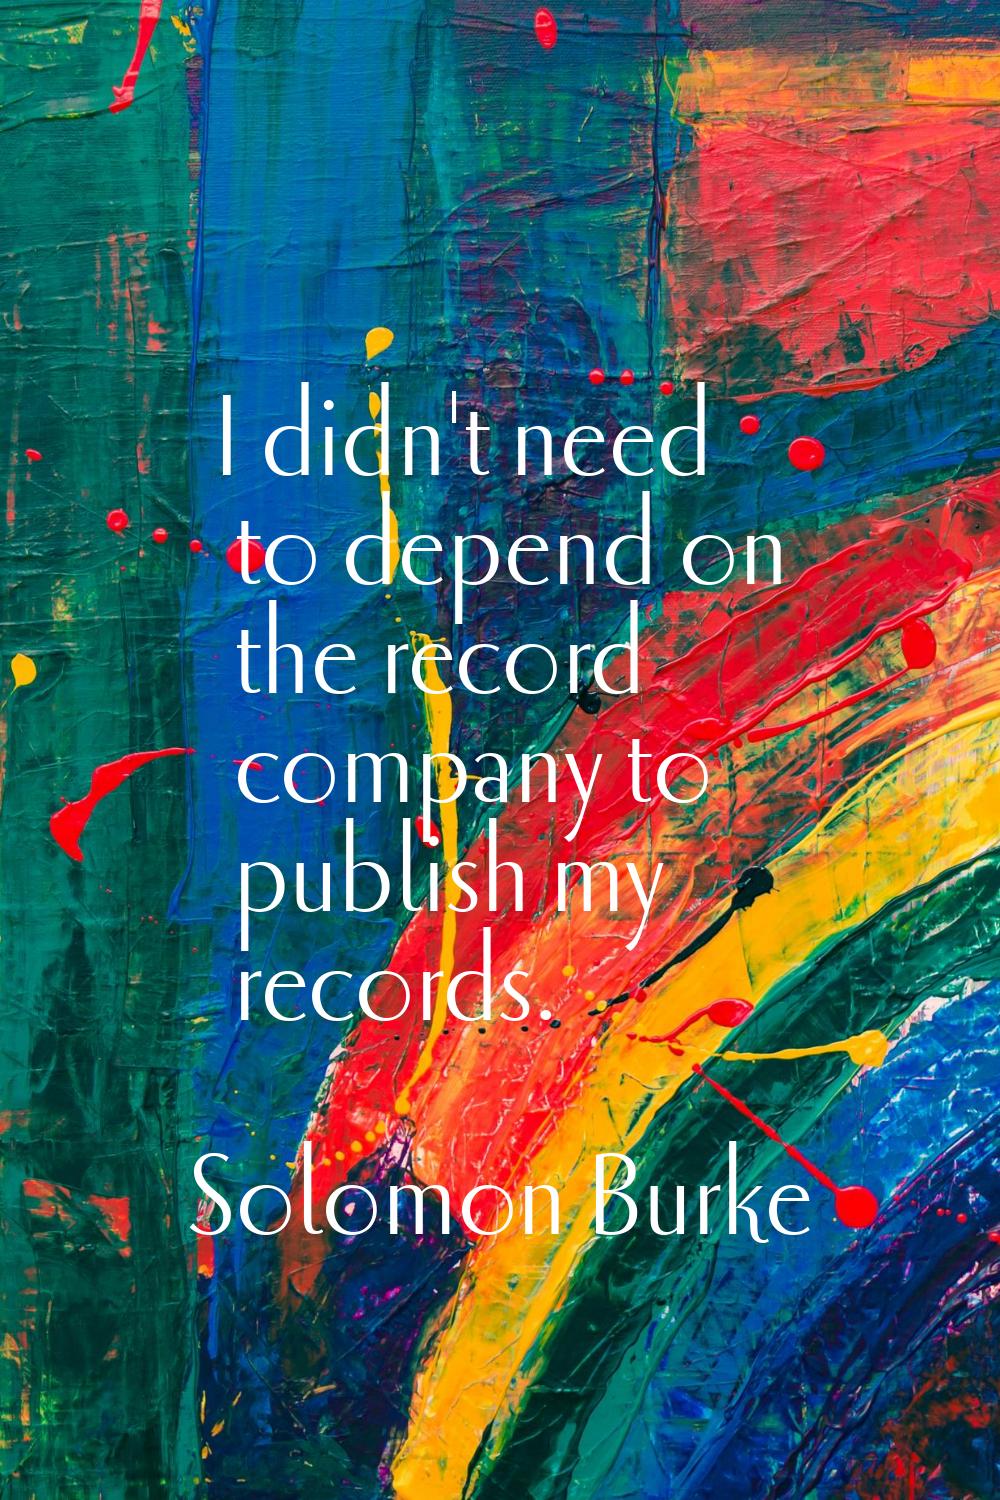 I didn't need to depend on the record company to publish my records.